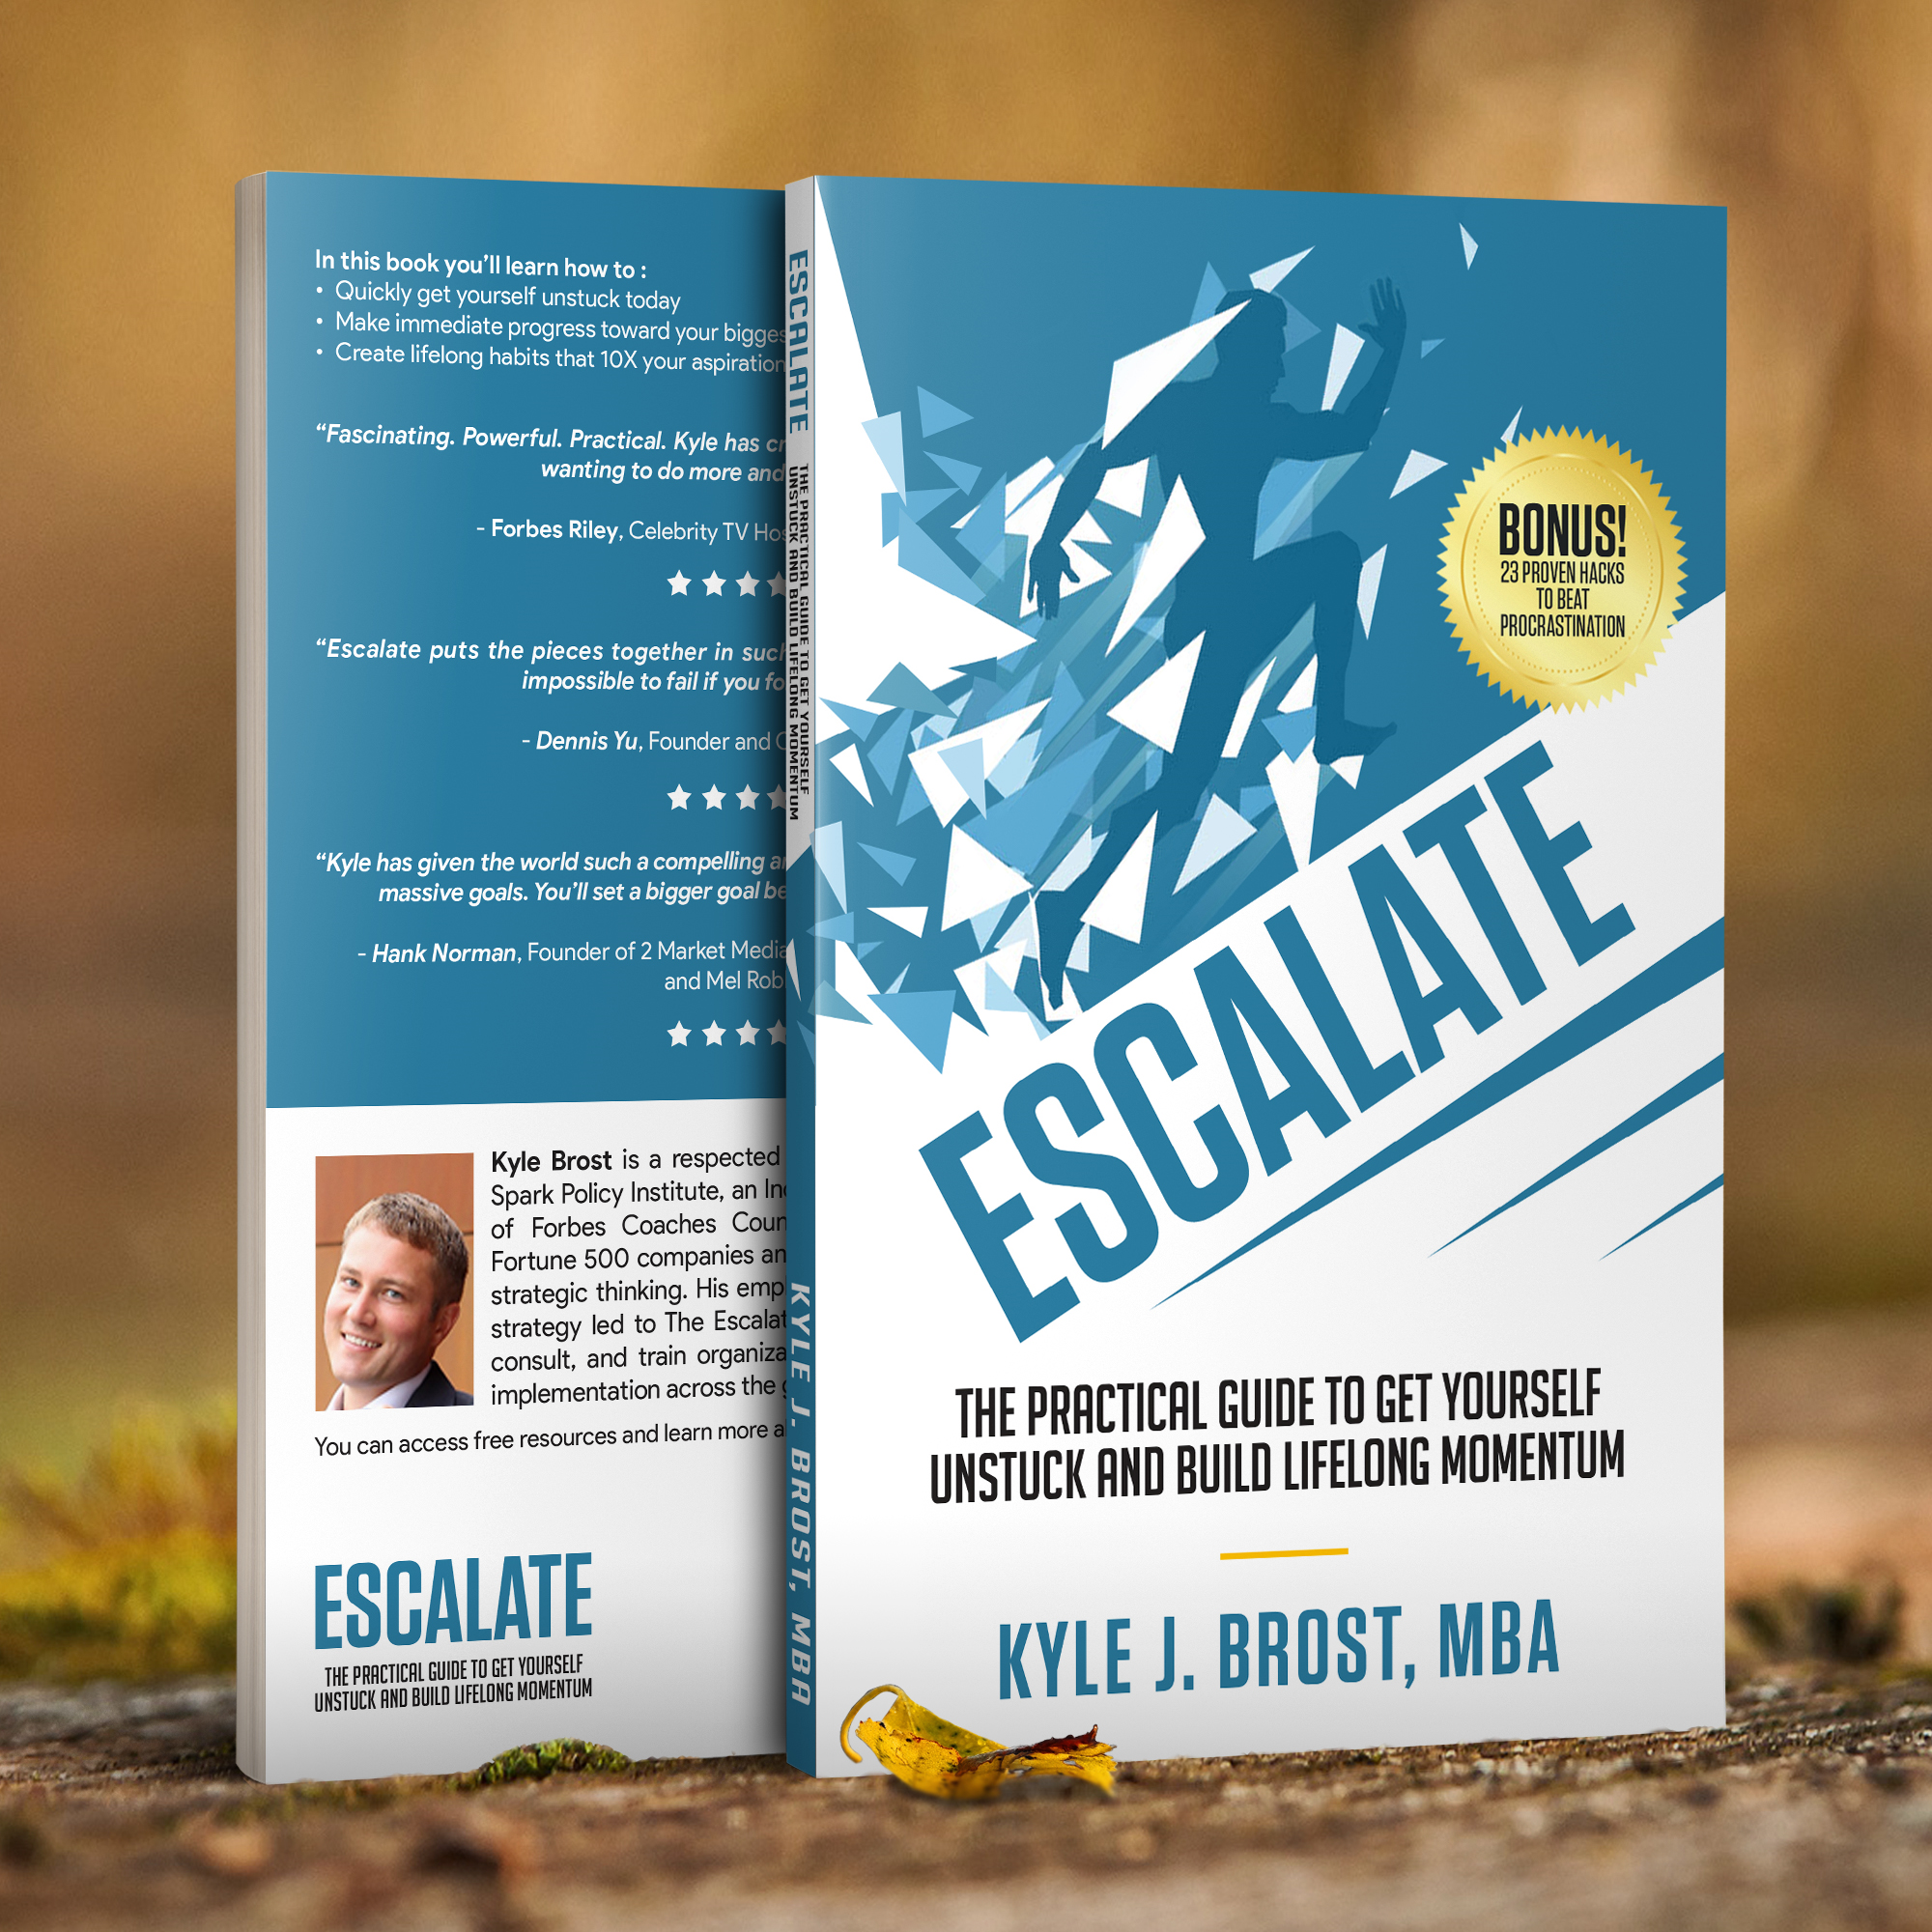 FREE: Escalate: The Practical Guide to Get Yourself Unstuck and Build Lifelong Momentum by Kyle Brost